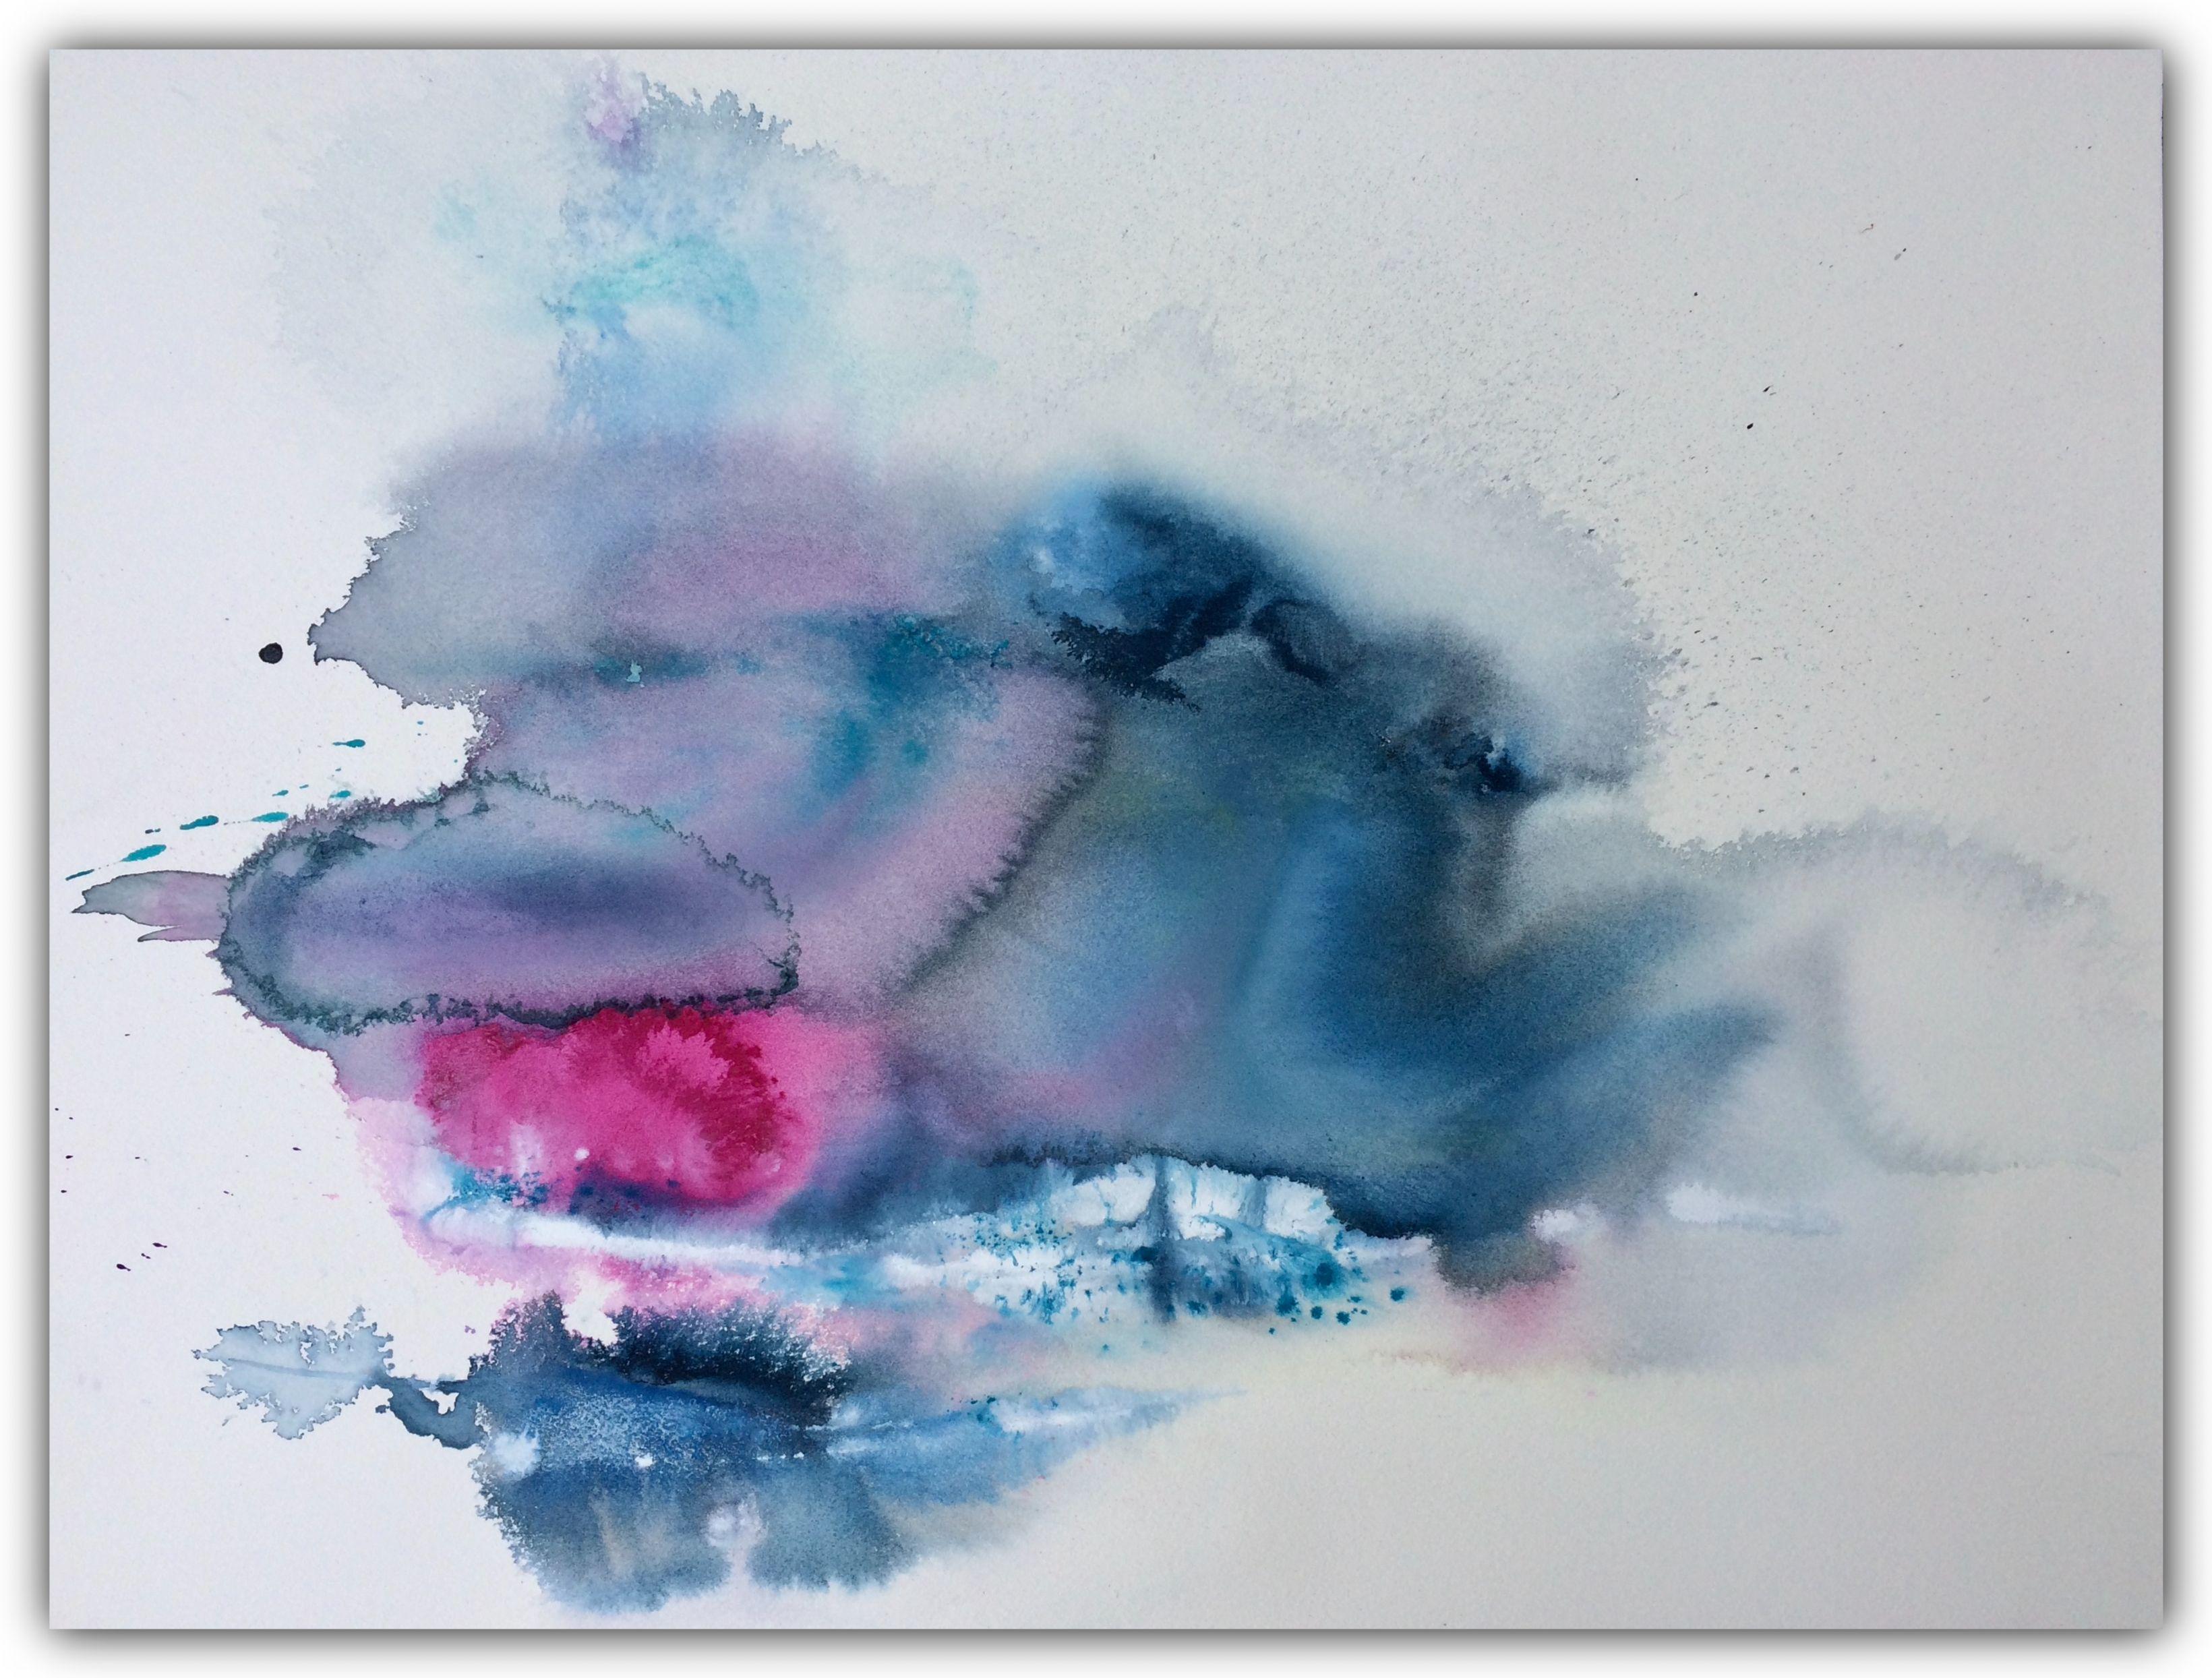 Song Of Clouds I Wolkenlied, Painting, Watercolor on Paper - Art by Gesa Reuter